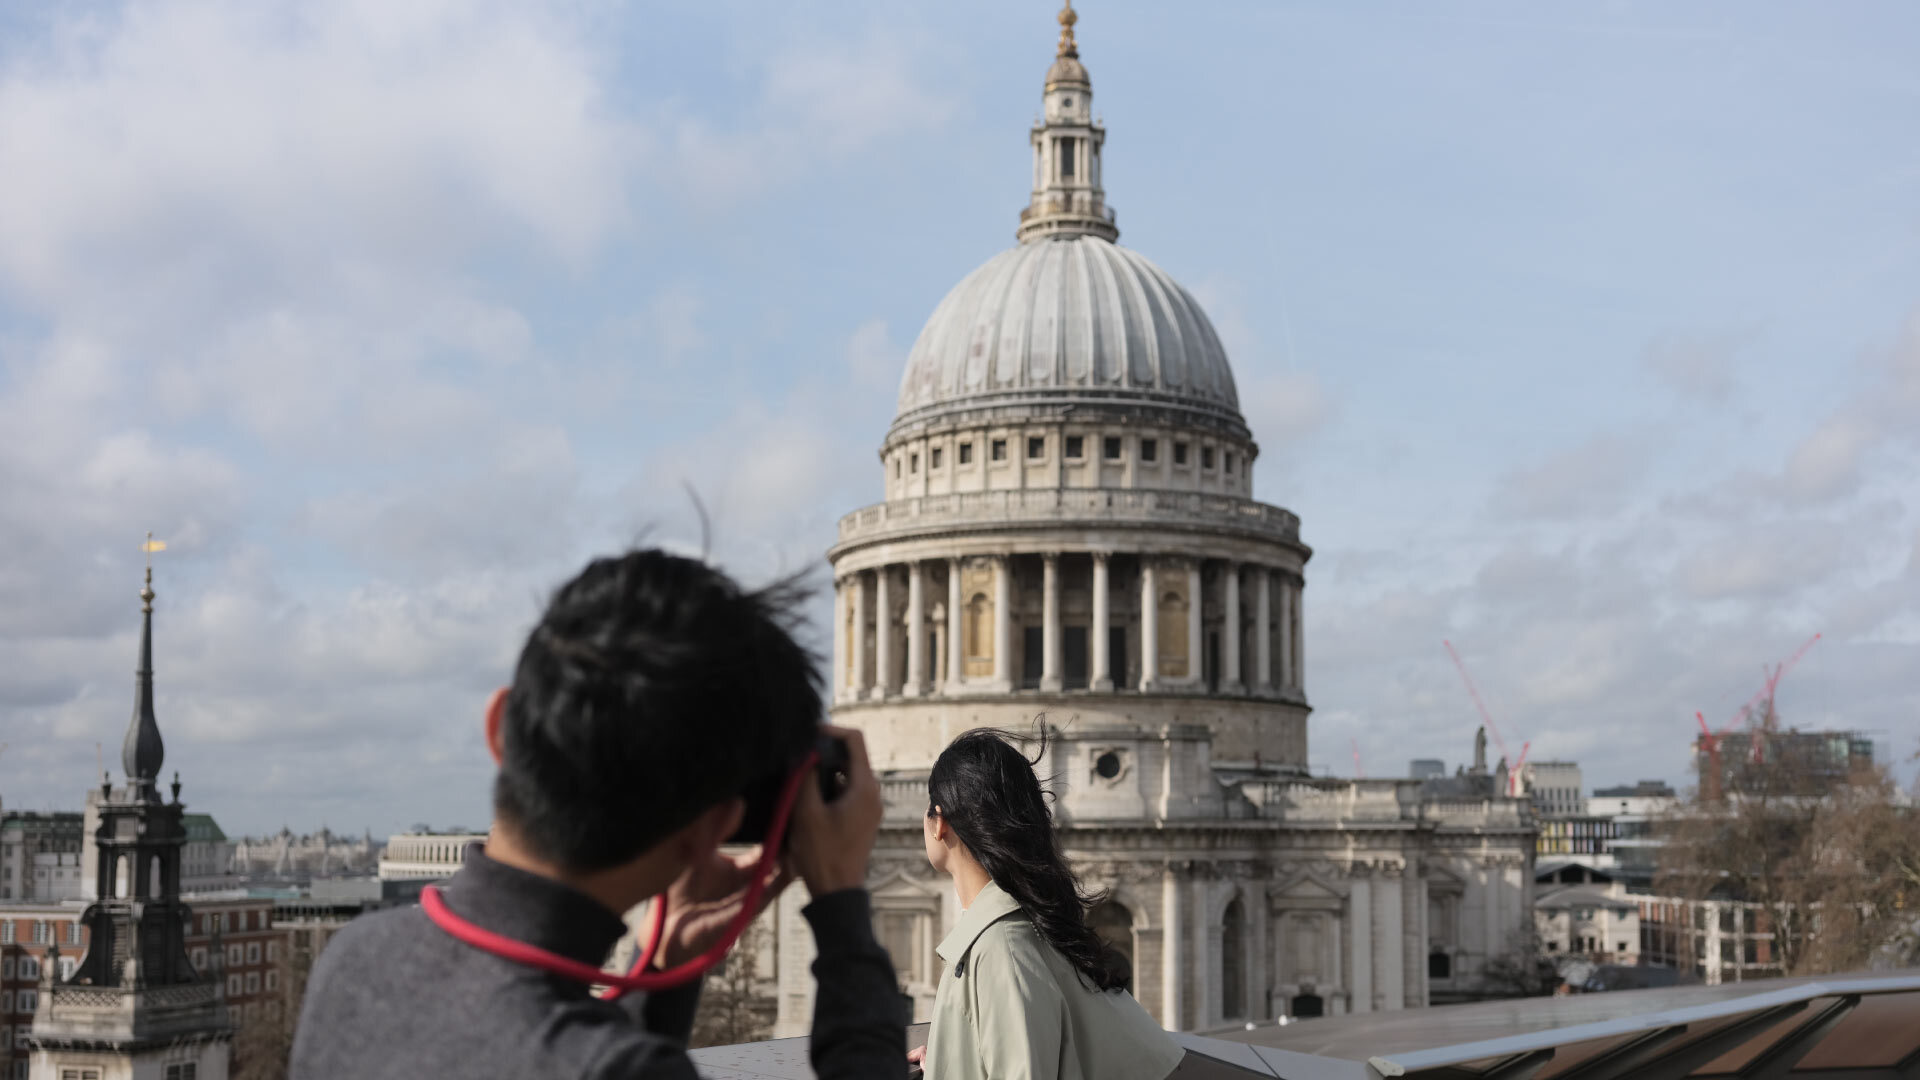 8 best Instagrammable places in London - Roof Terrace at One New Change - man taking picture of woman on balcony with a view of St Paul's 